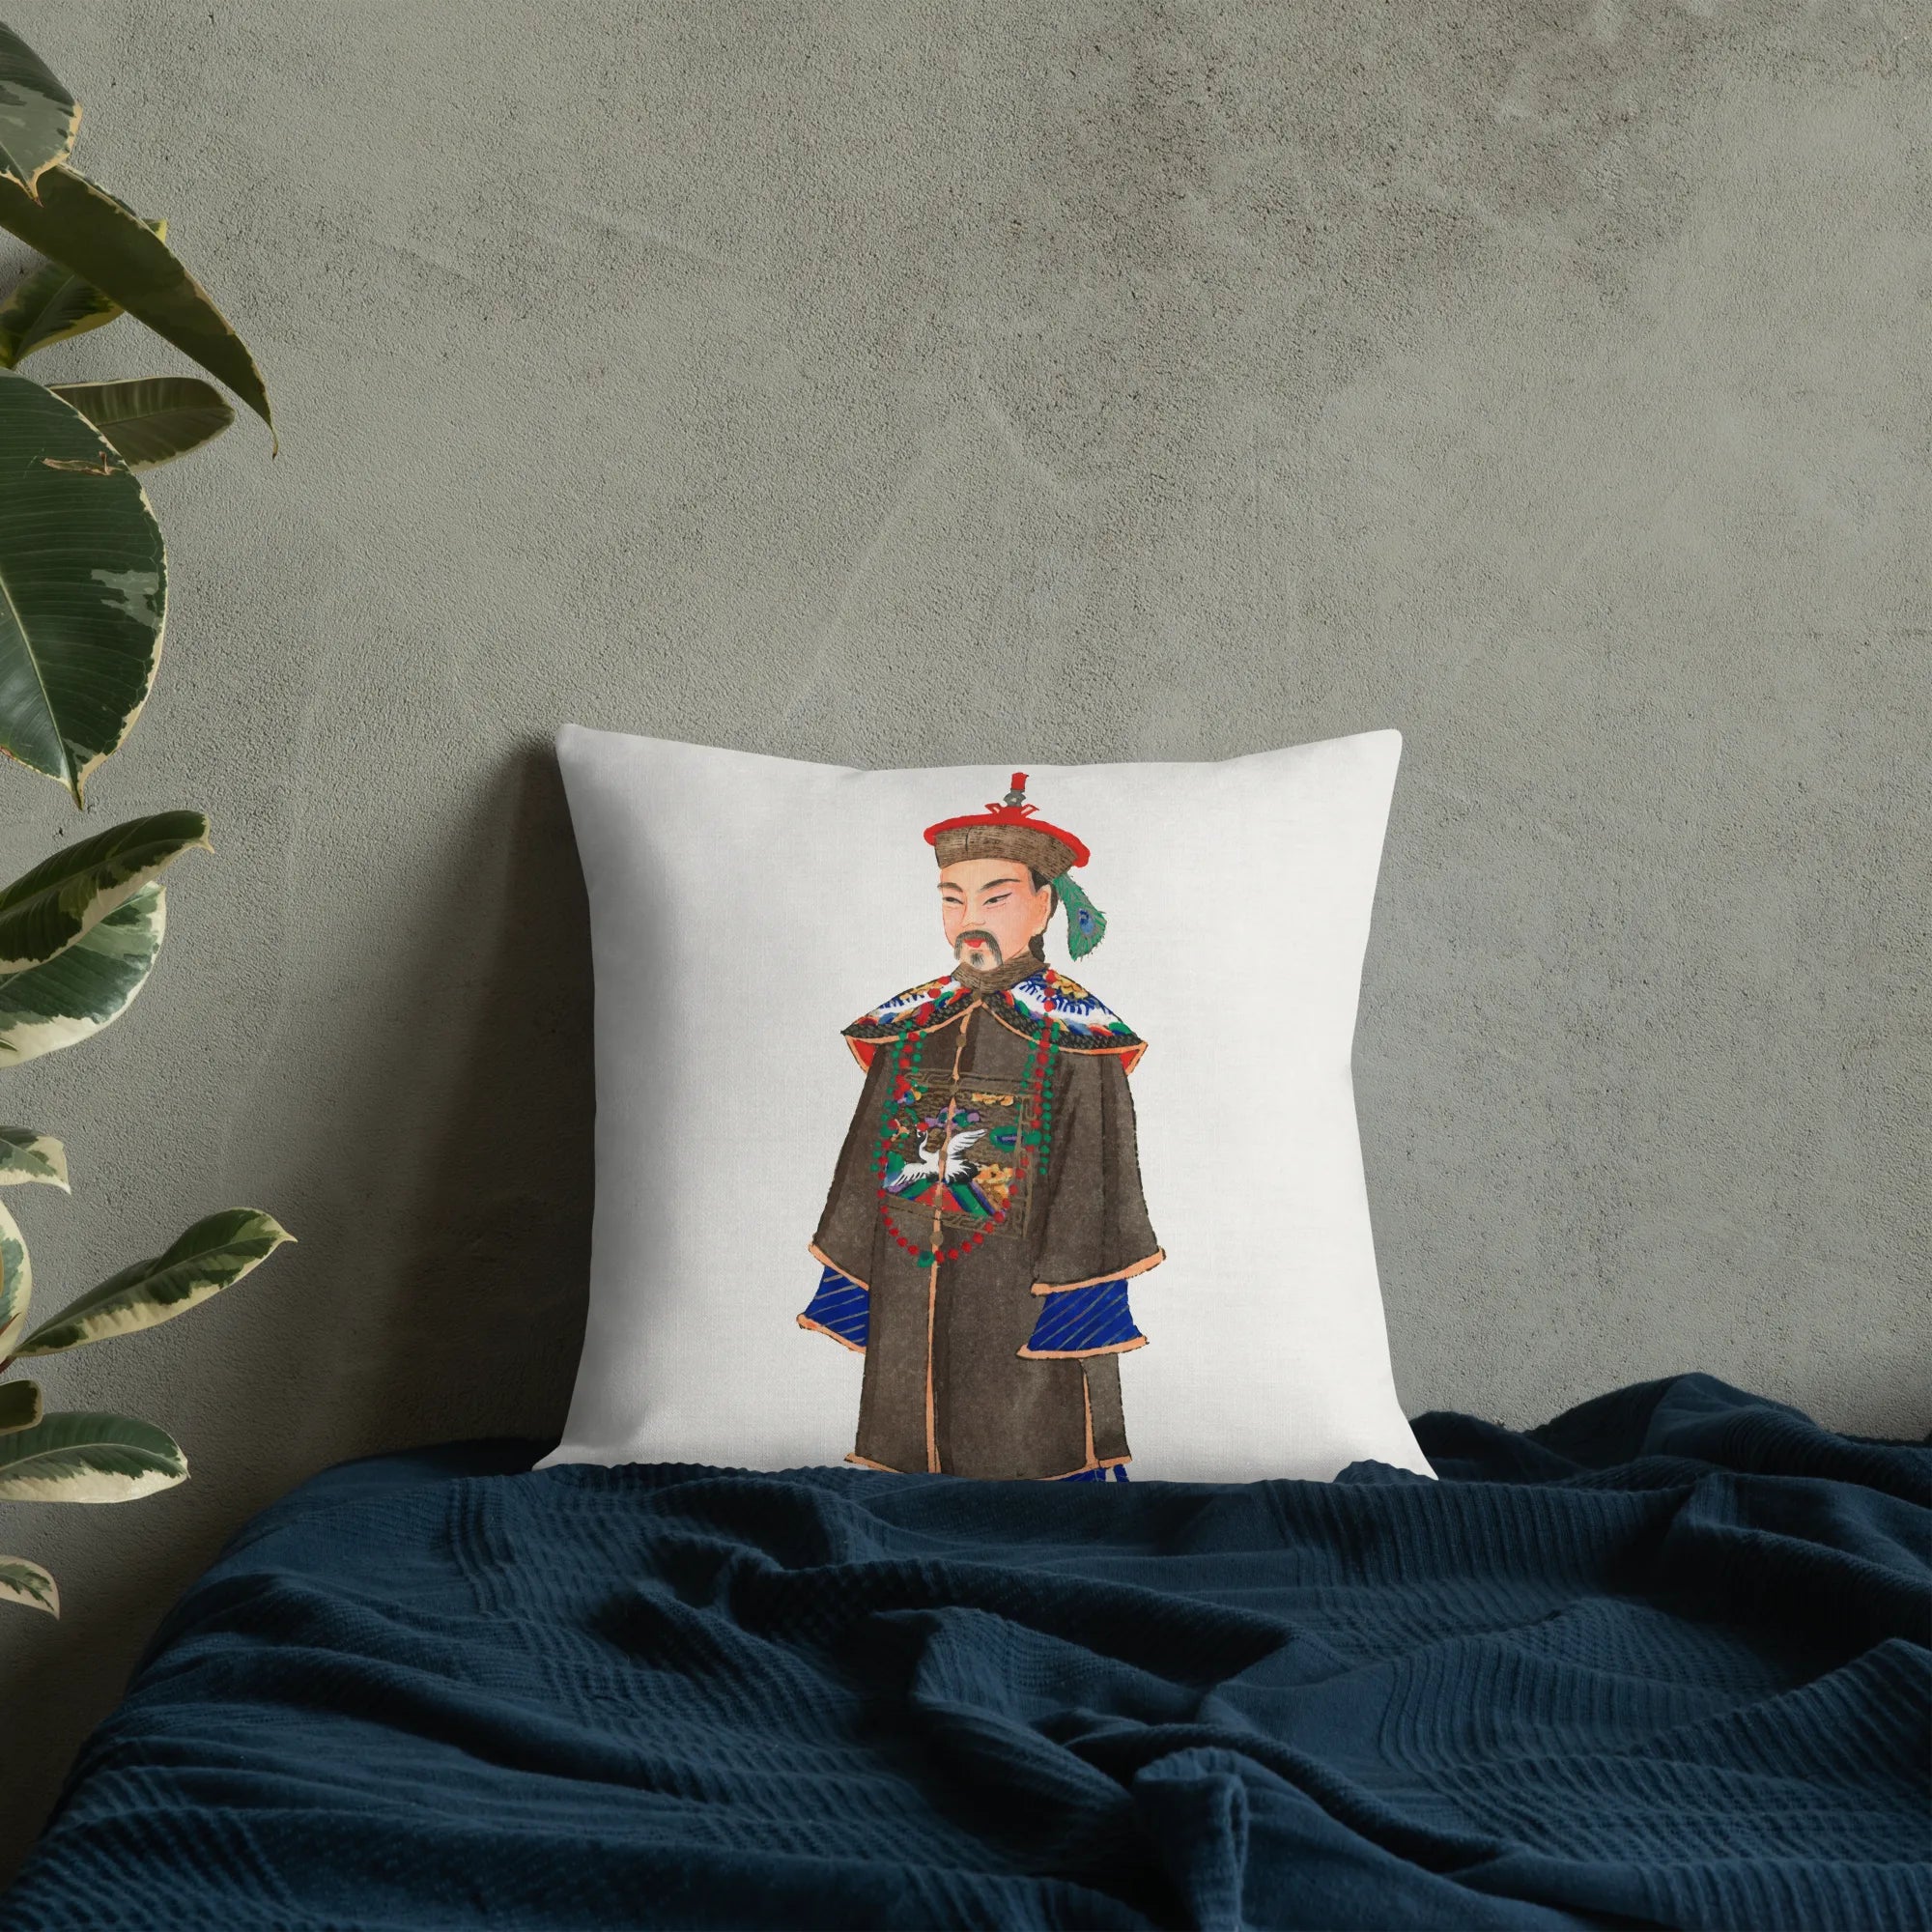 Chinese Nobleman At Court Cushion - Throw Pillows - Aesthetic Art